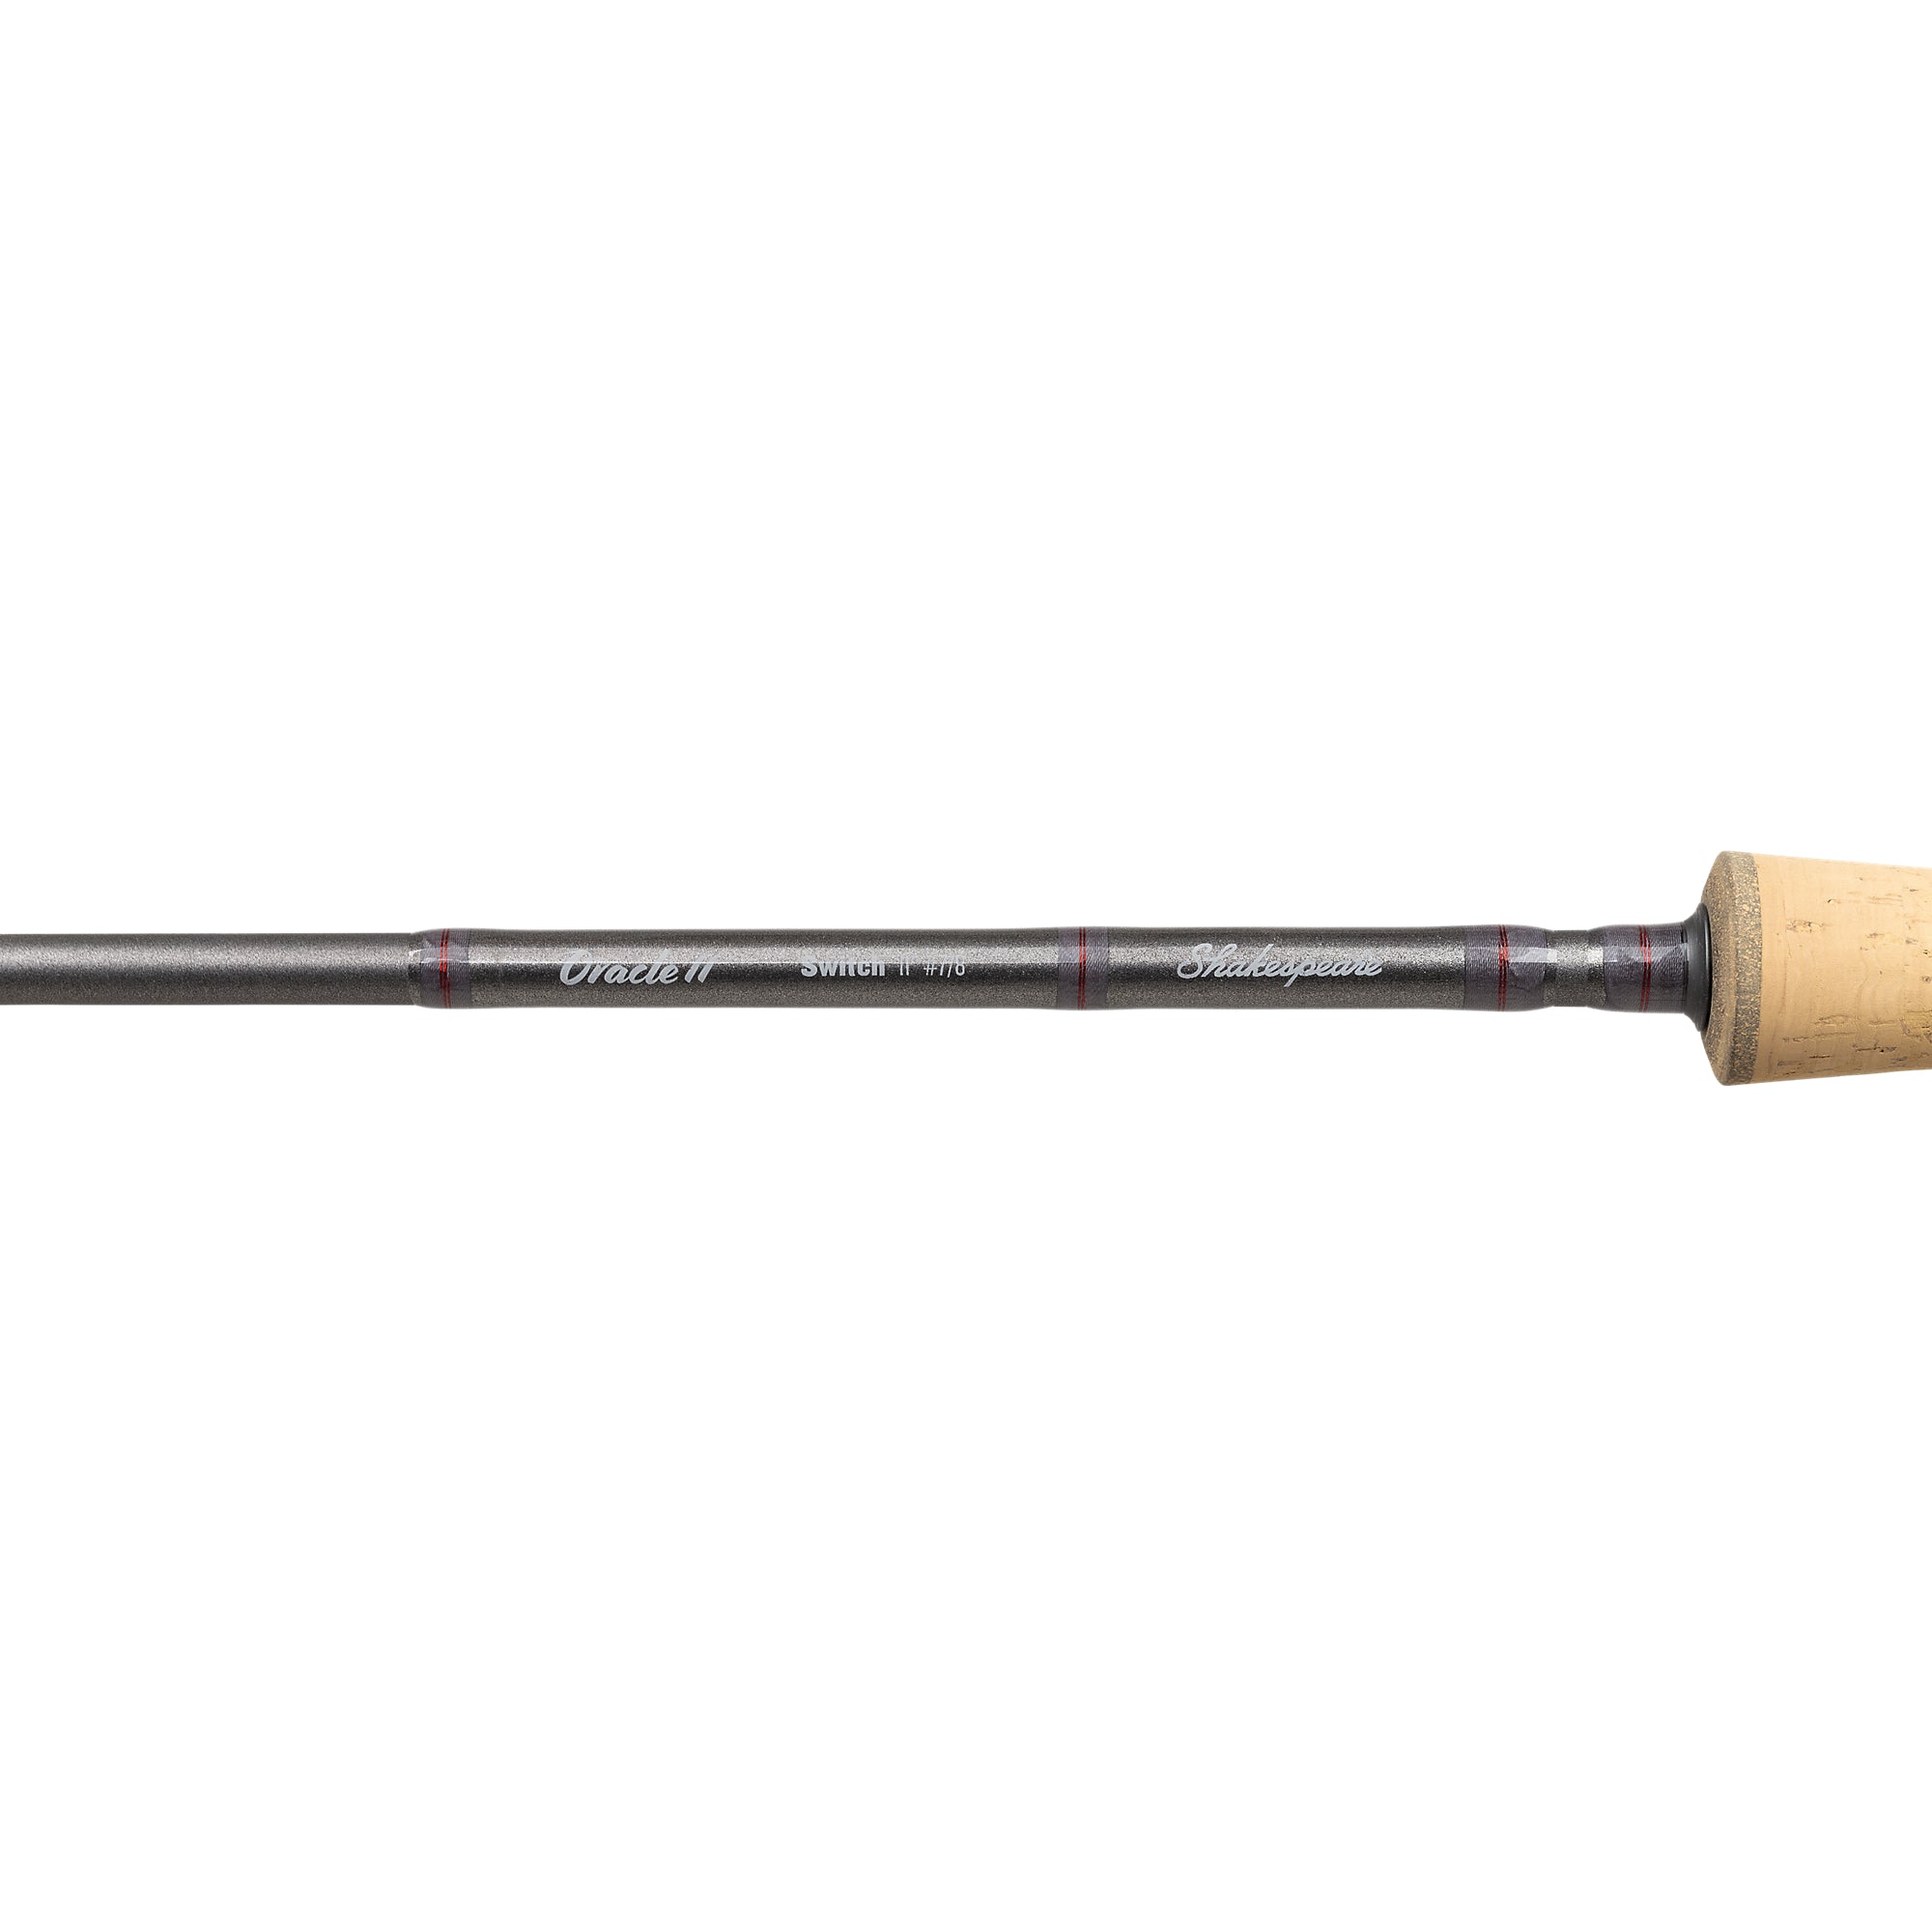 SHAKESPEARE ORACLE 2 SWITCH FLY RODS